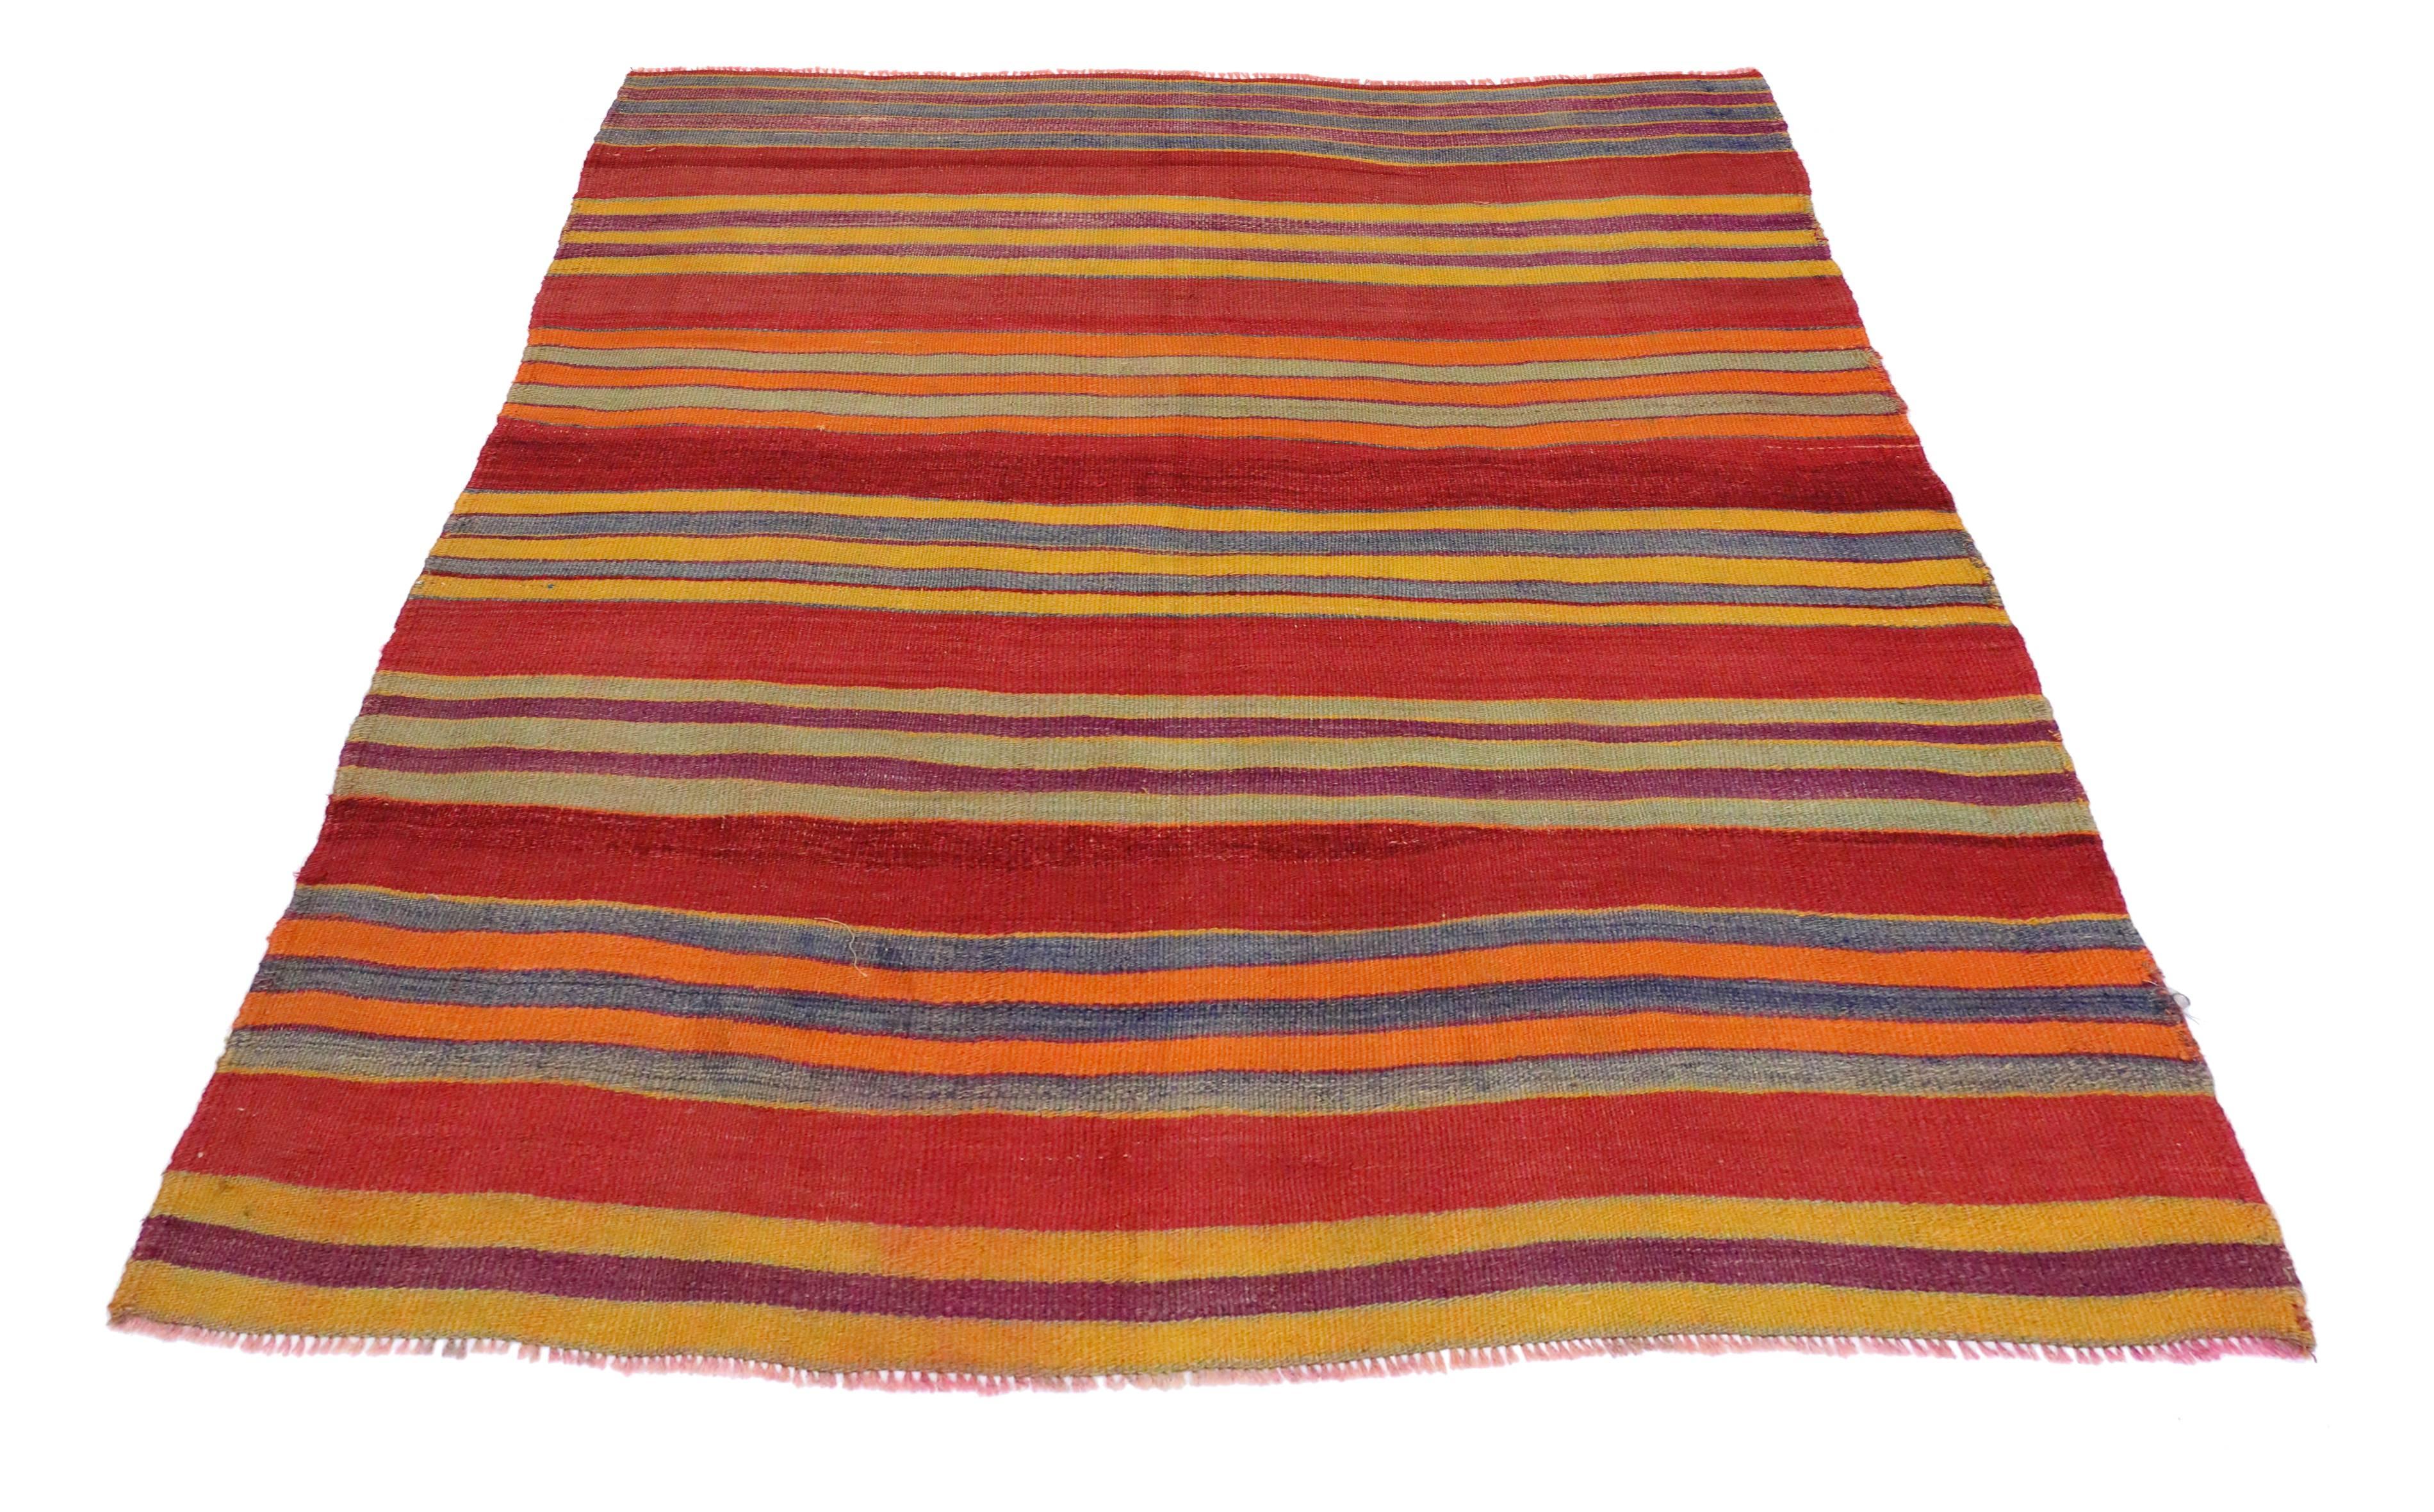 Hand-Woven Vintage Turkish Kilim with Multi-Color Stripes in Modern Style, Red FlatWeave